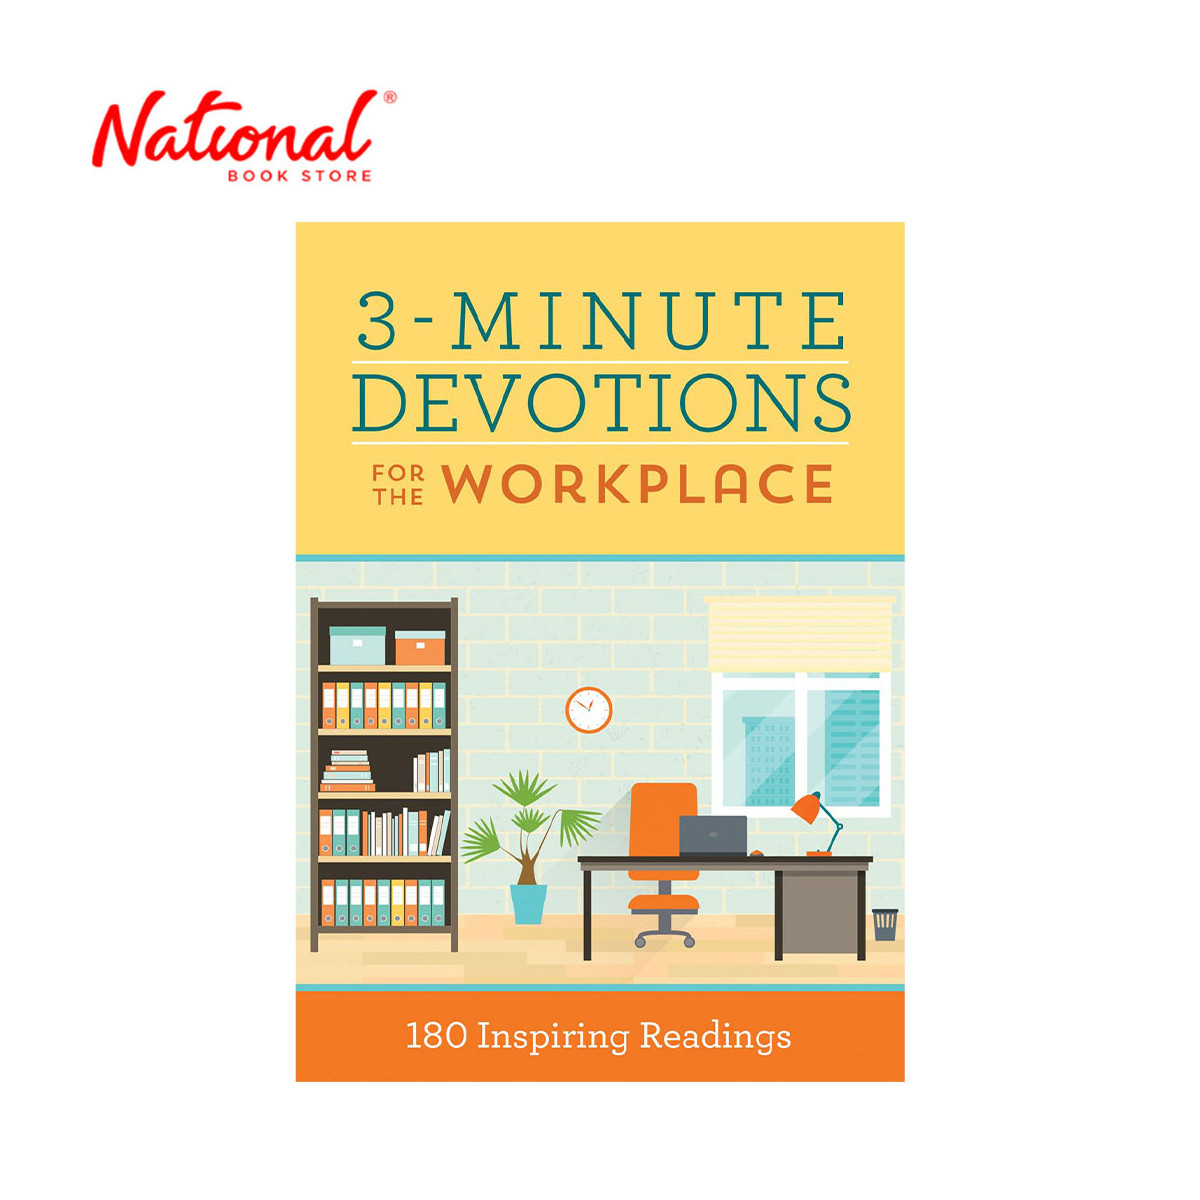 3-Minute Devotions for the Workplace: 180 Inspiring Reading by Pamela L. Mcquade - Trade Paperback